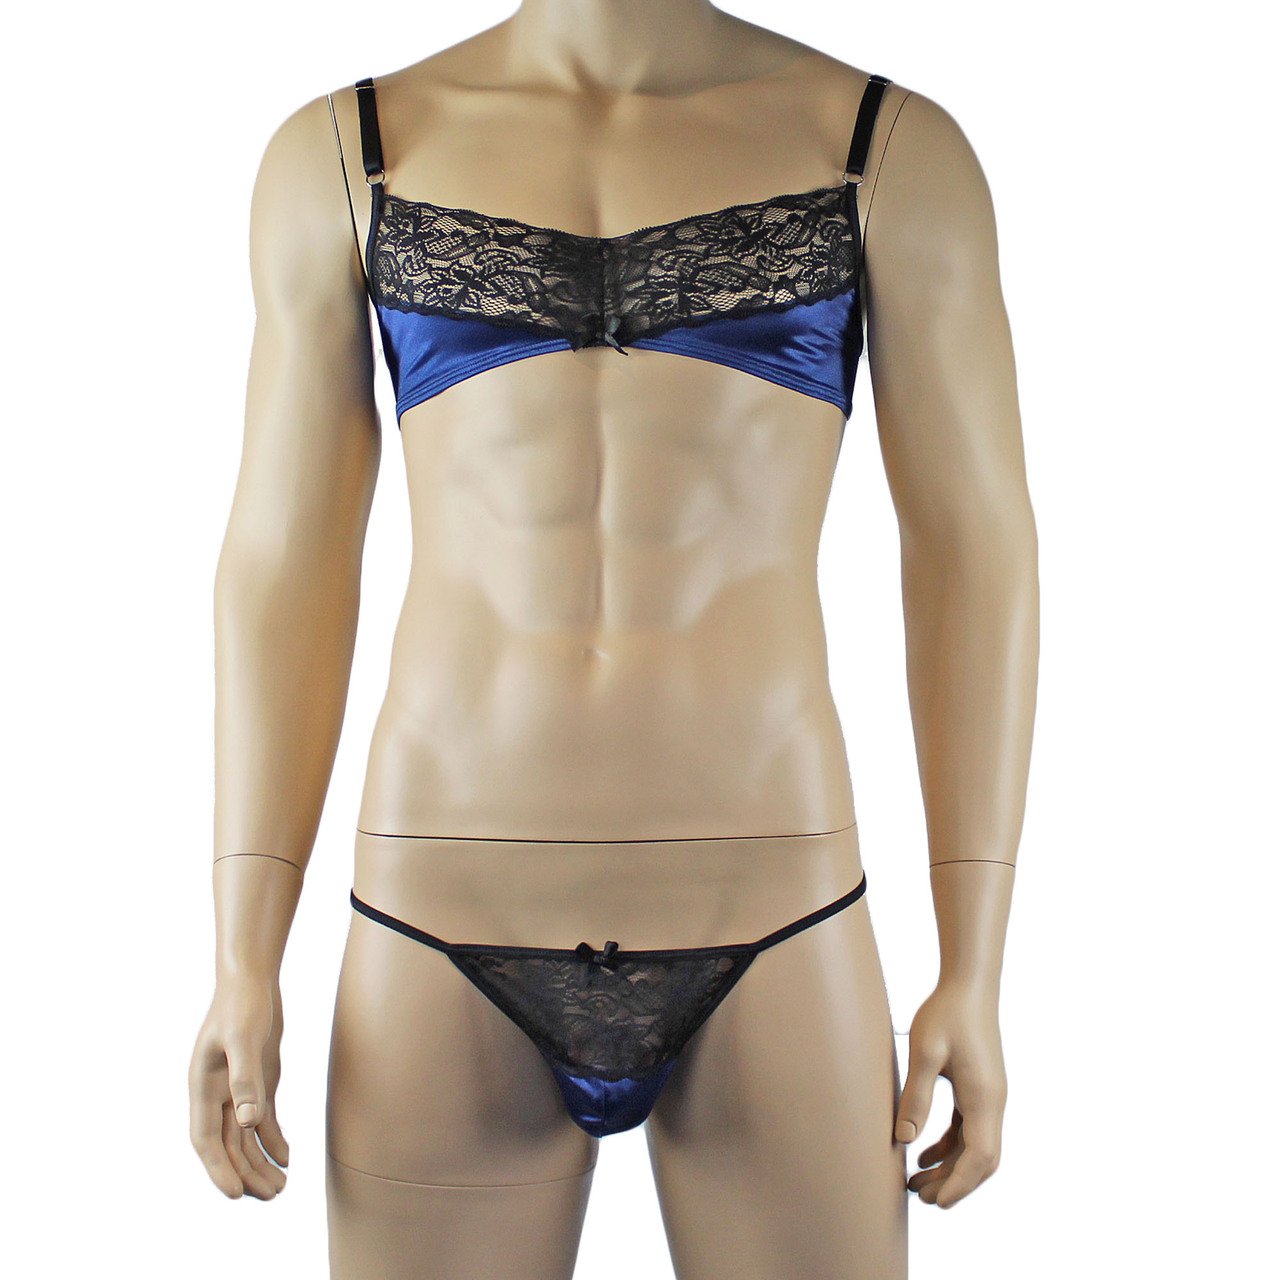 Mens Glamour Bra Top and Pouch G string with Lace Trim (navy & black plus other colours)